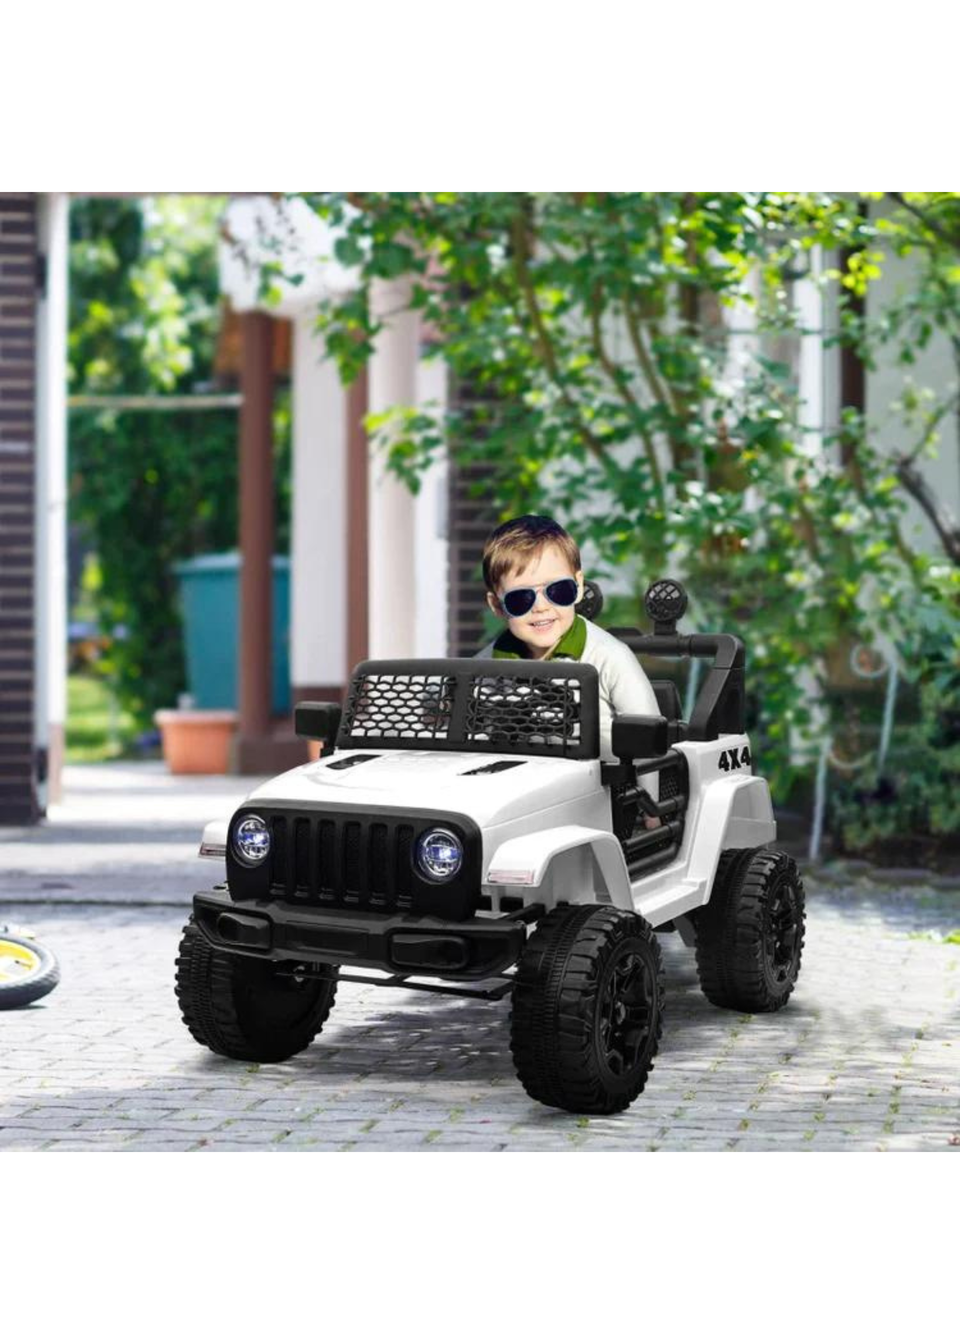 HOMCOM 12V Kids Electric Ride On Car Truck Off-road Toy with Remote Control (White)